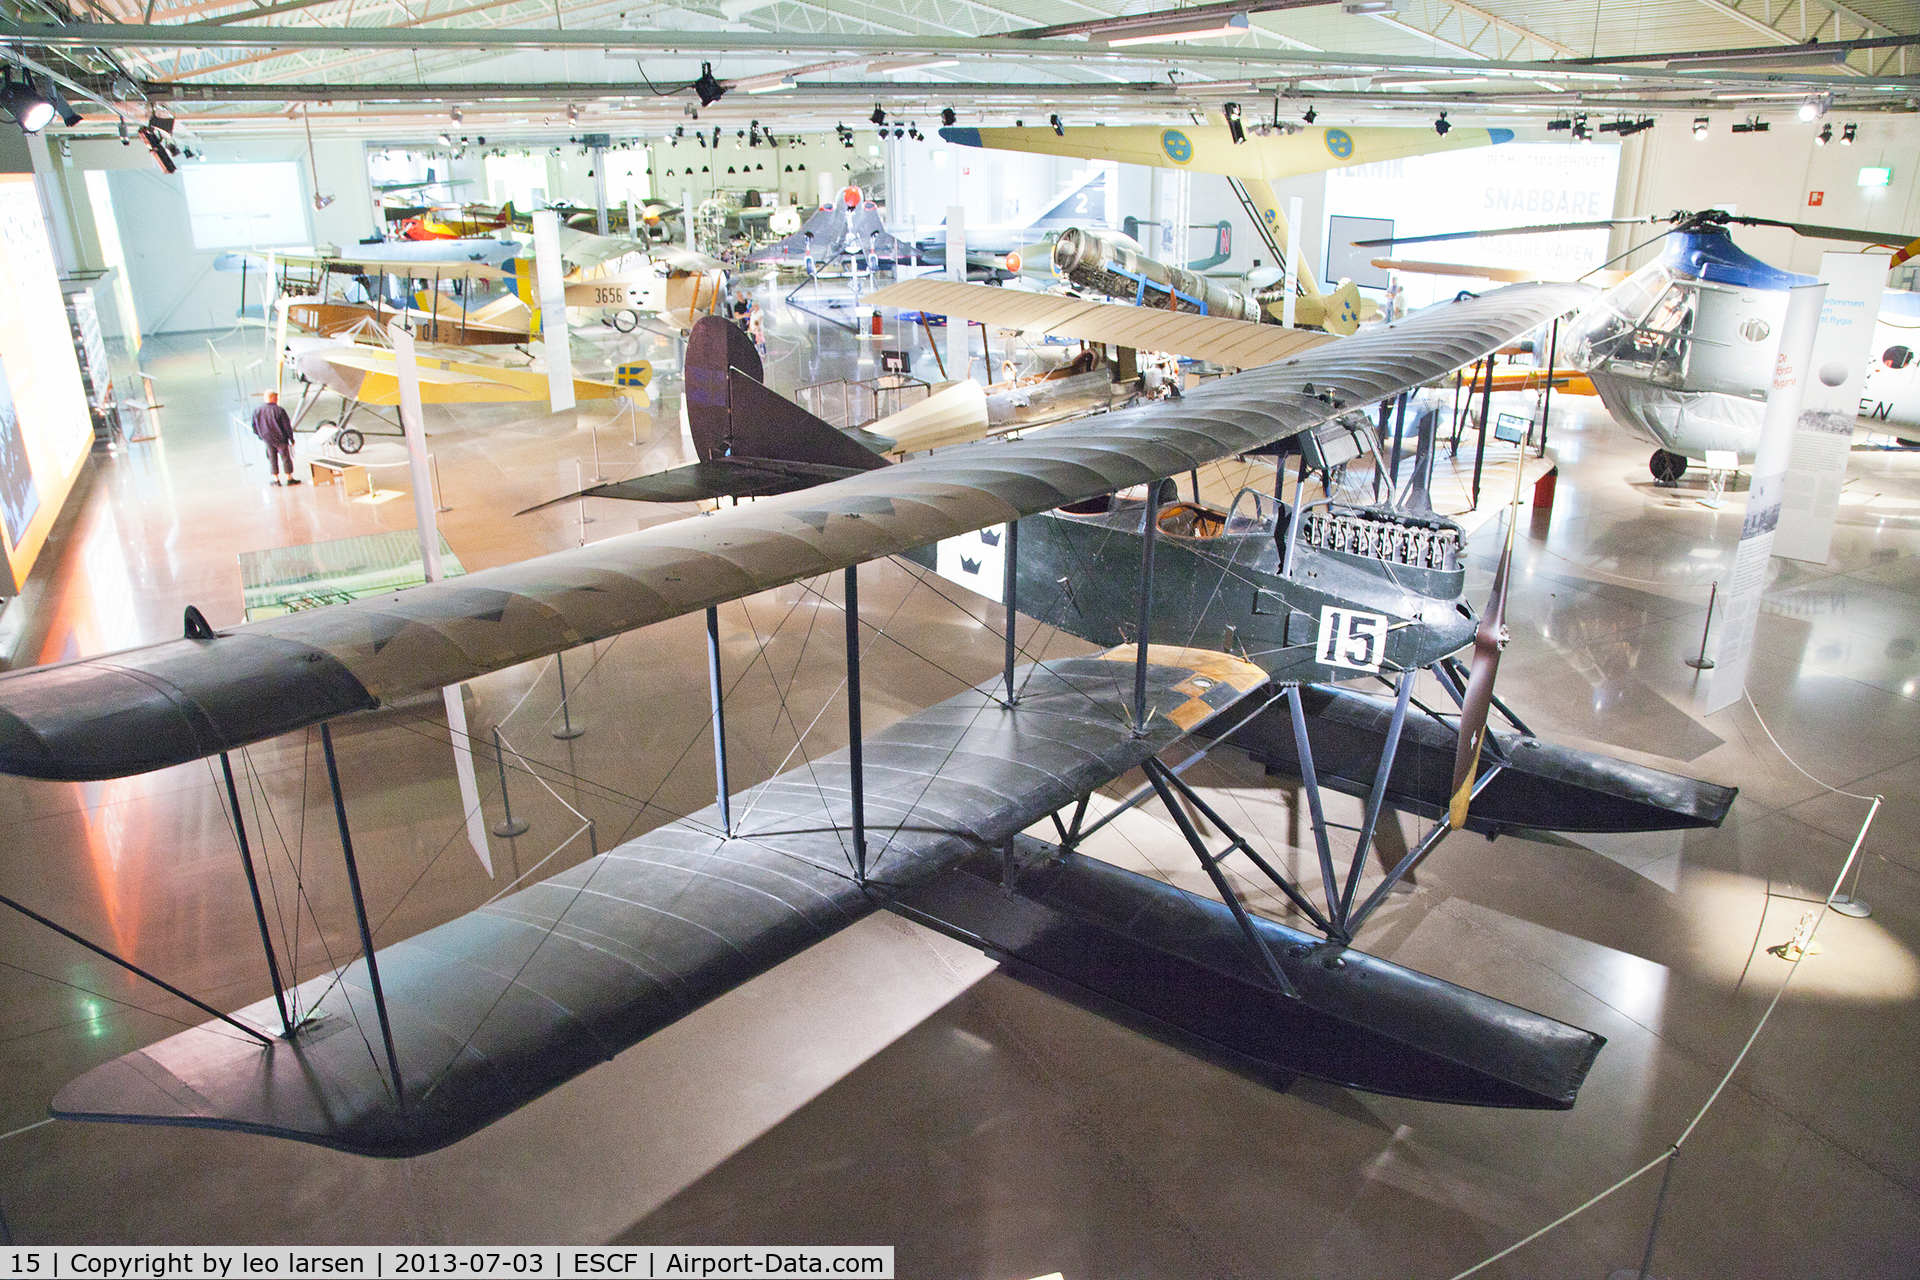 15, 1917 Thulin G C/N Not found 15, Flygvapen Museum Linkoping 3.7.13